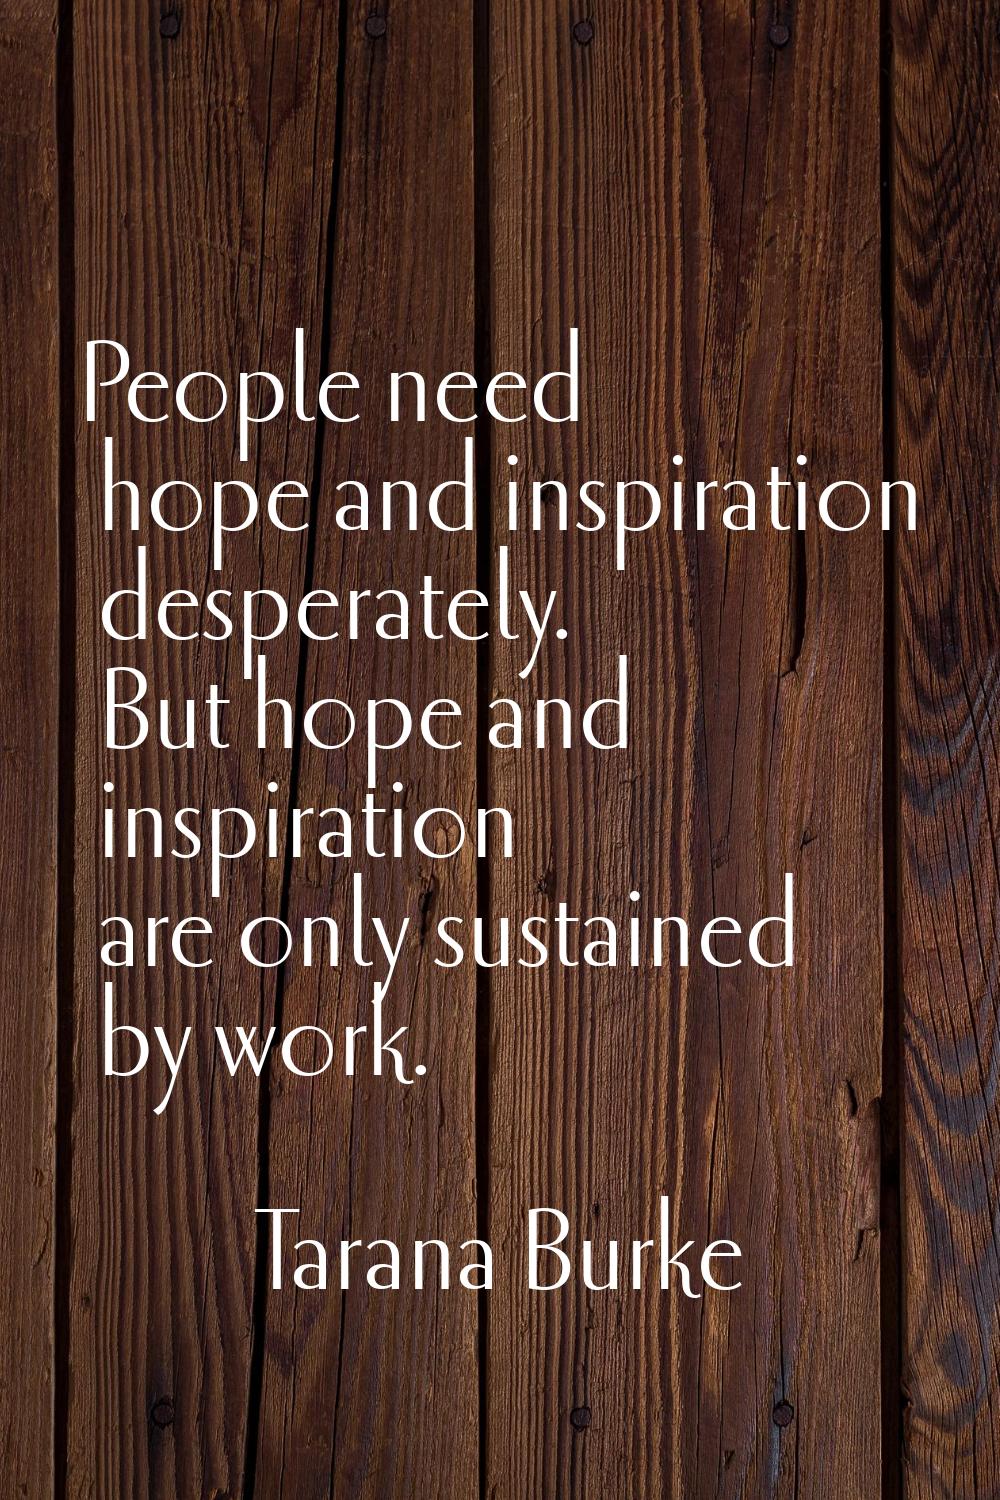 People need hope and inspiration desperately. But hope and inspiration are only sustained by work.